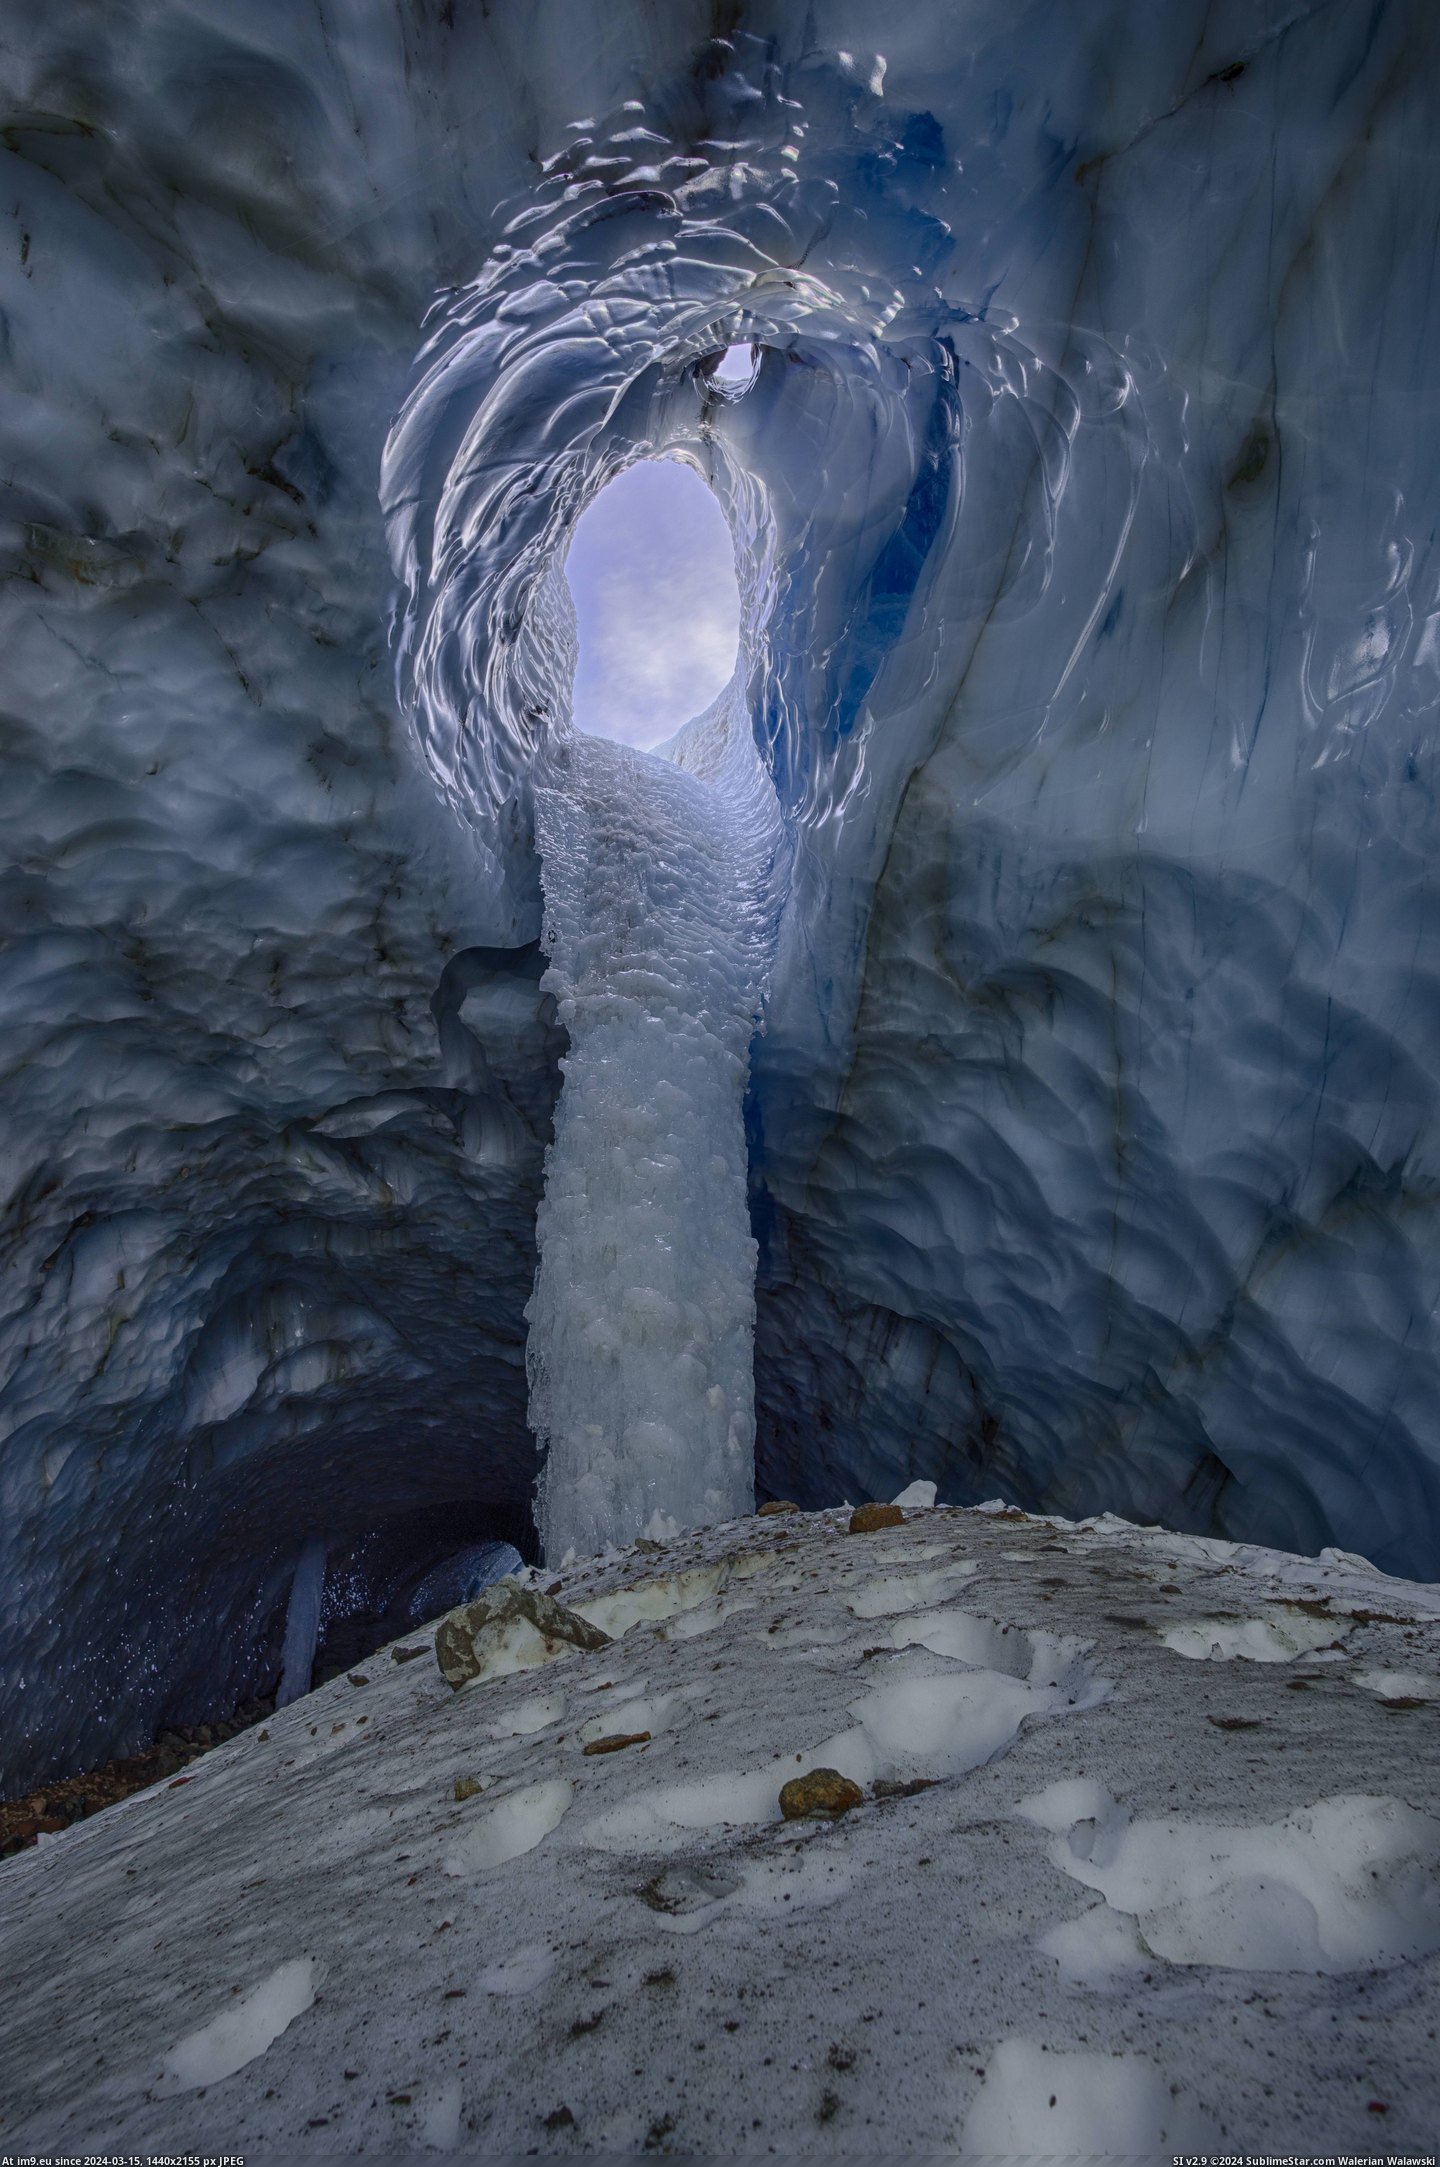 #Photo #Oregon #Waterfall #Hood #Cave #Glacier #Frozen [Earthporn] A view to the outside through a frozen waterfall inside a glacier cave on Mt. Hood, Oregon  [4009x6011] Photo by: Ja Pic. (Изображение из альбом My r/EARTHPORN favs))